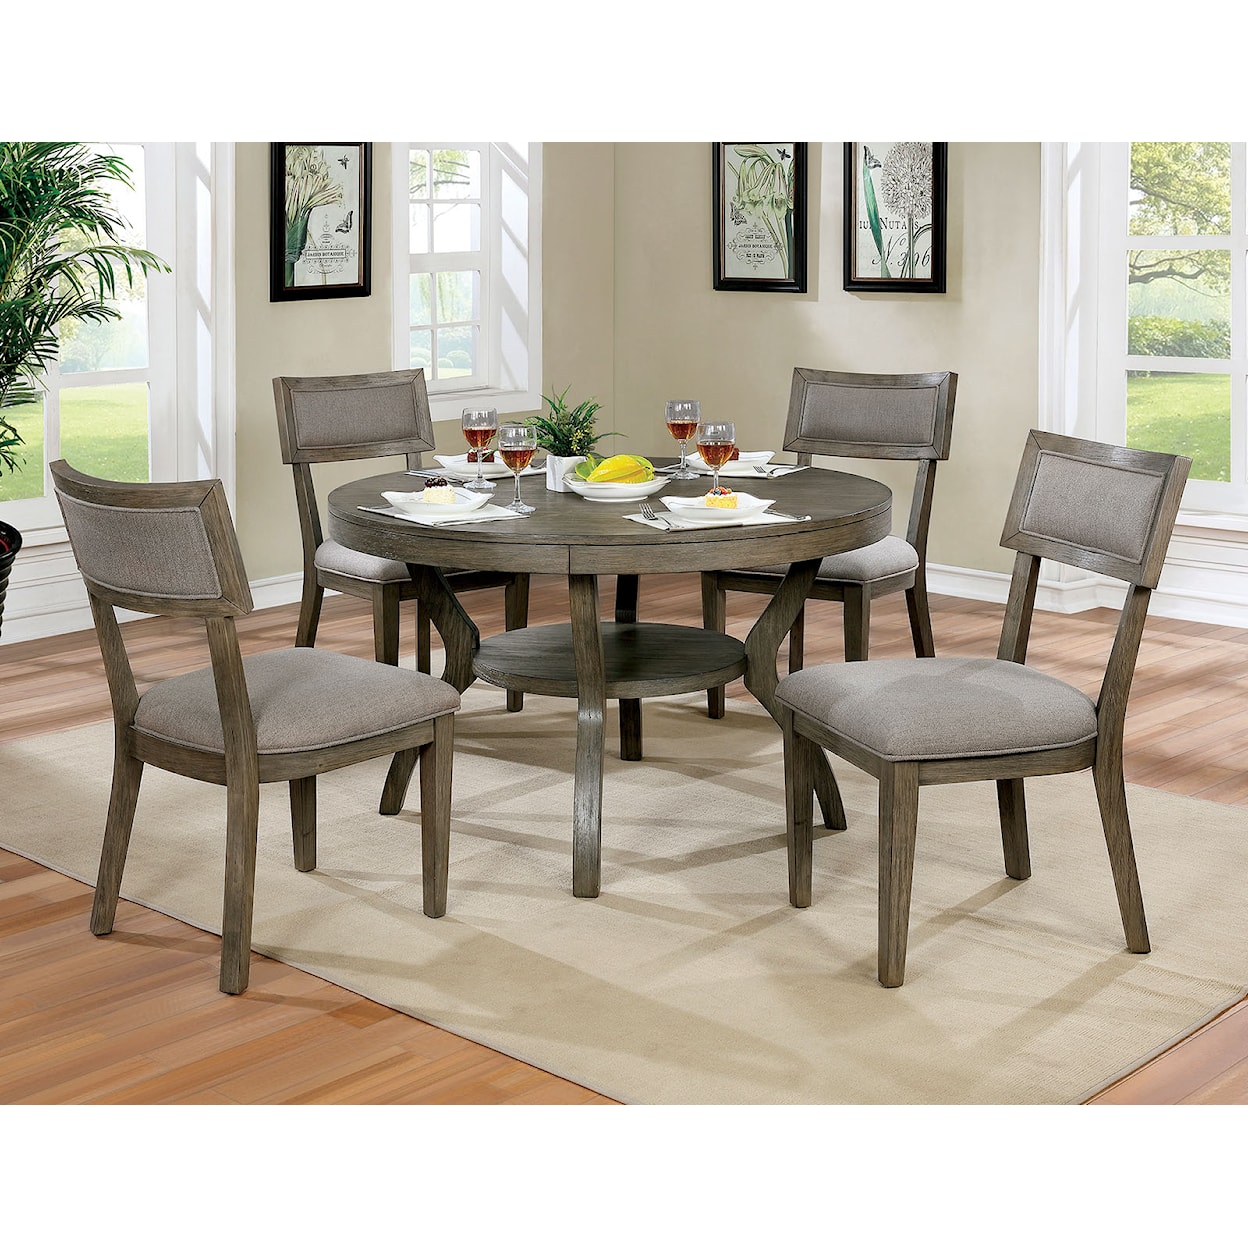 Furniture of America Leeds Round Dining Table